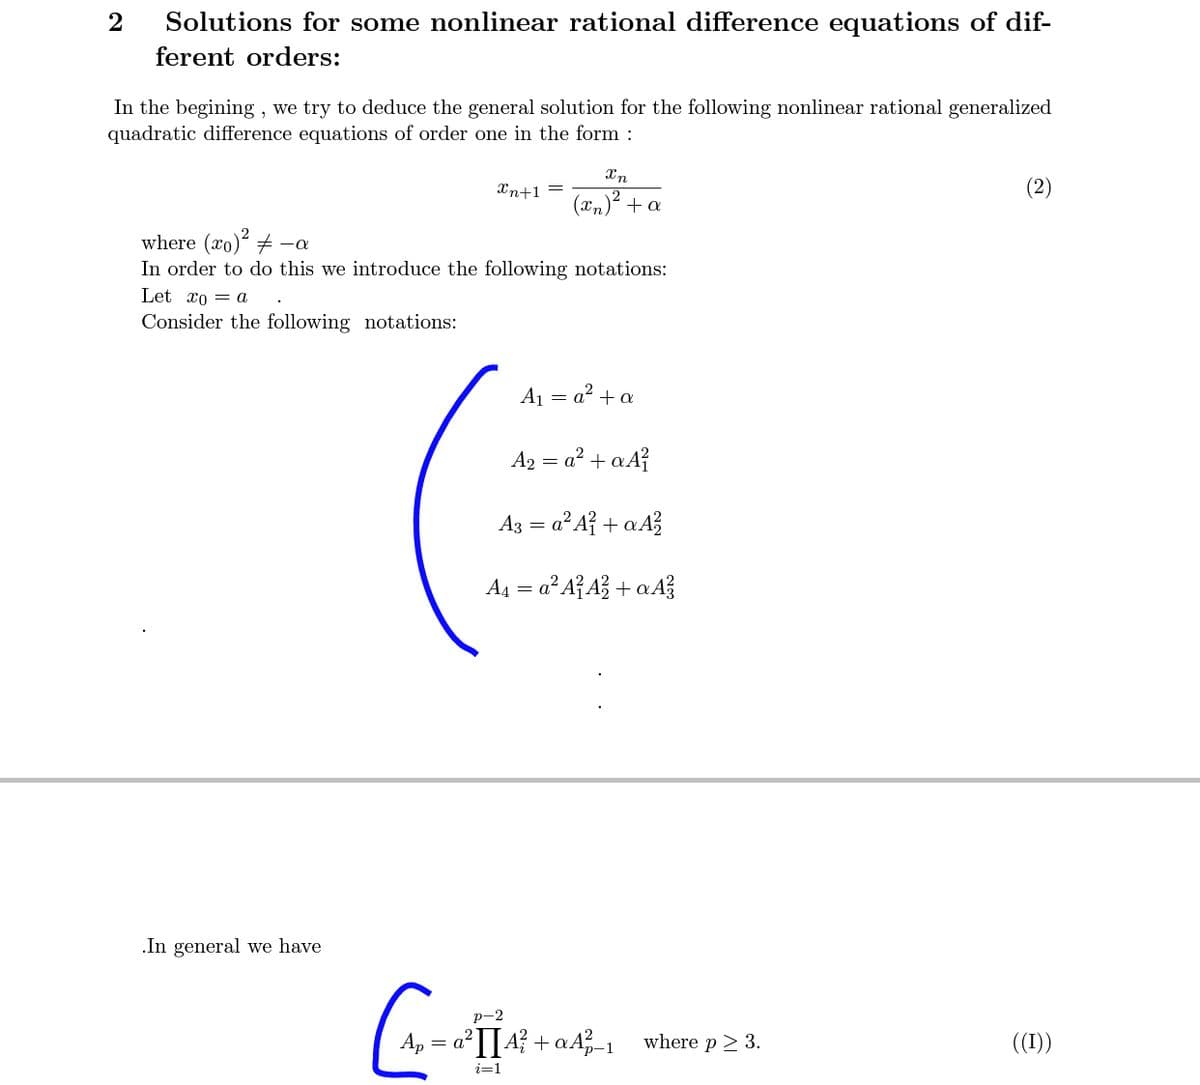 2
Solutions for some nonlinear rational difference equations of dif-
ferent orders:
In the begining , we try to deduce the general solution for the following nonlinear rational generalized
quadratic difference equations of order one in the form :
Xn
Xn+1 =
(xn)² + a
where (xo)² + -a
In order to do this we introduce the following notations:
Let xo = a
Consider the following notations:
A1 = a? + a
A2 = a? + aA?
Az = a² A? + a A}
A4 = a² A{A? + aA?
.In general we have
р-2
Ap = a°I[4? + aA_1 where p 2 3.
((1))
p-1
i=1
